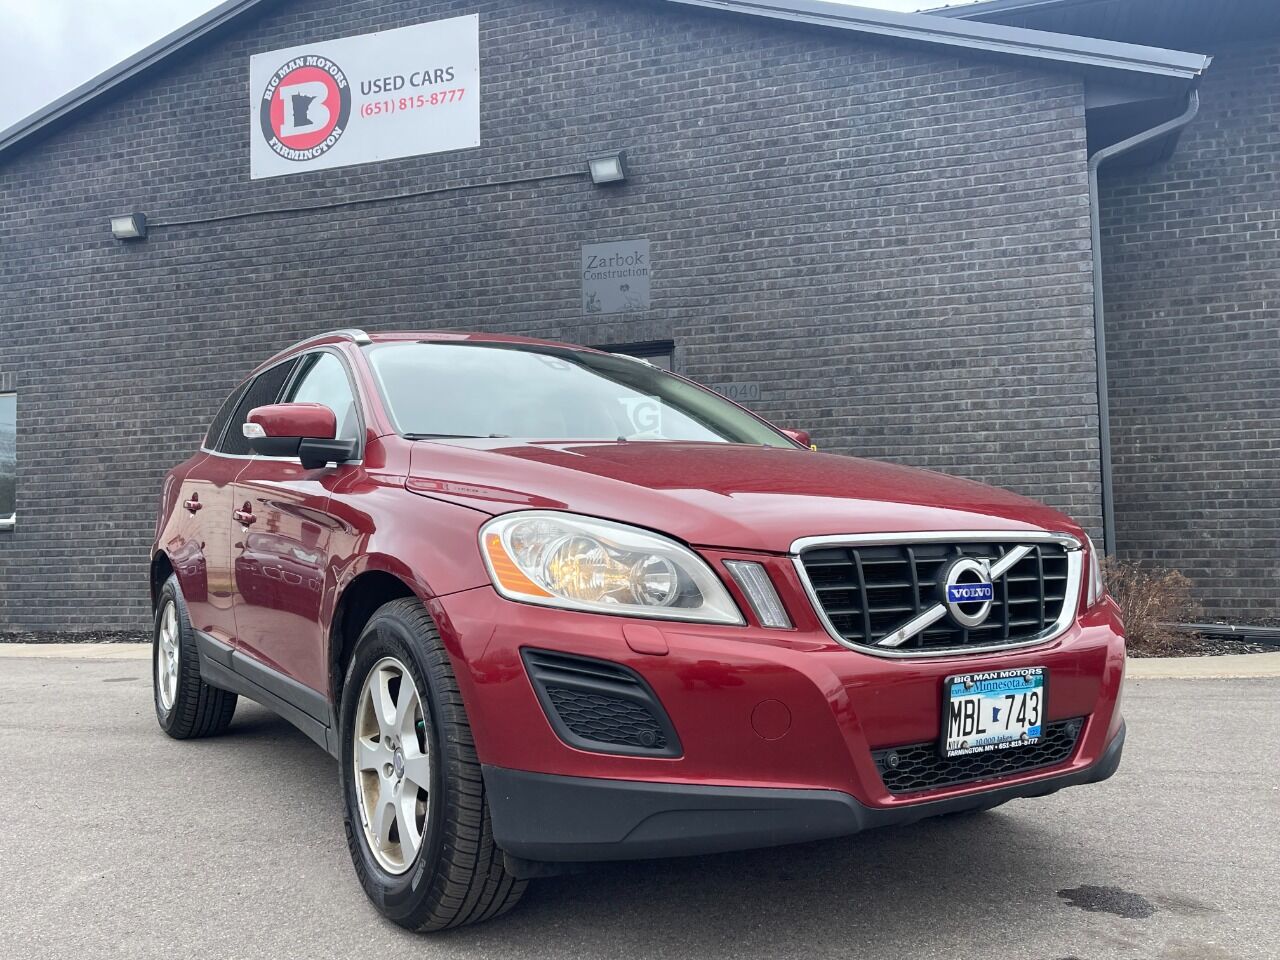 2011 Volvo XC60 For Sale - Carsforsale.com®